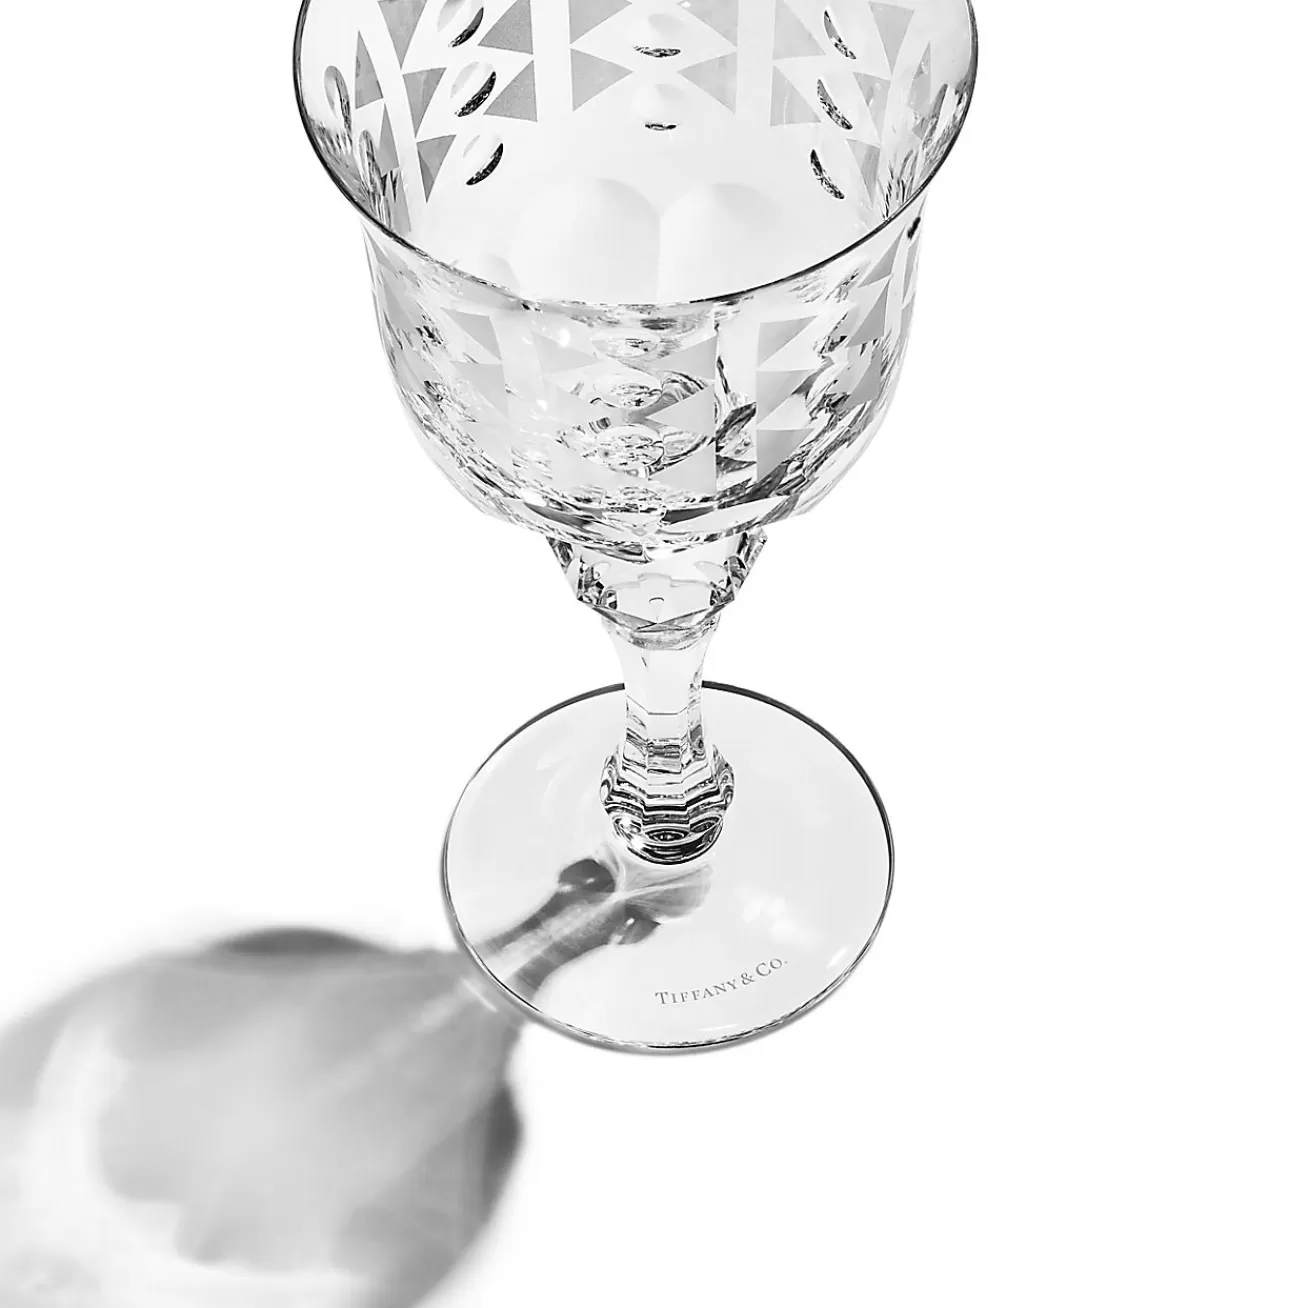 Tiffany & Co. Tiffany Berries White Wine Glass in Clear Lead Crystal | ^ The Home | Housewarming Gifts